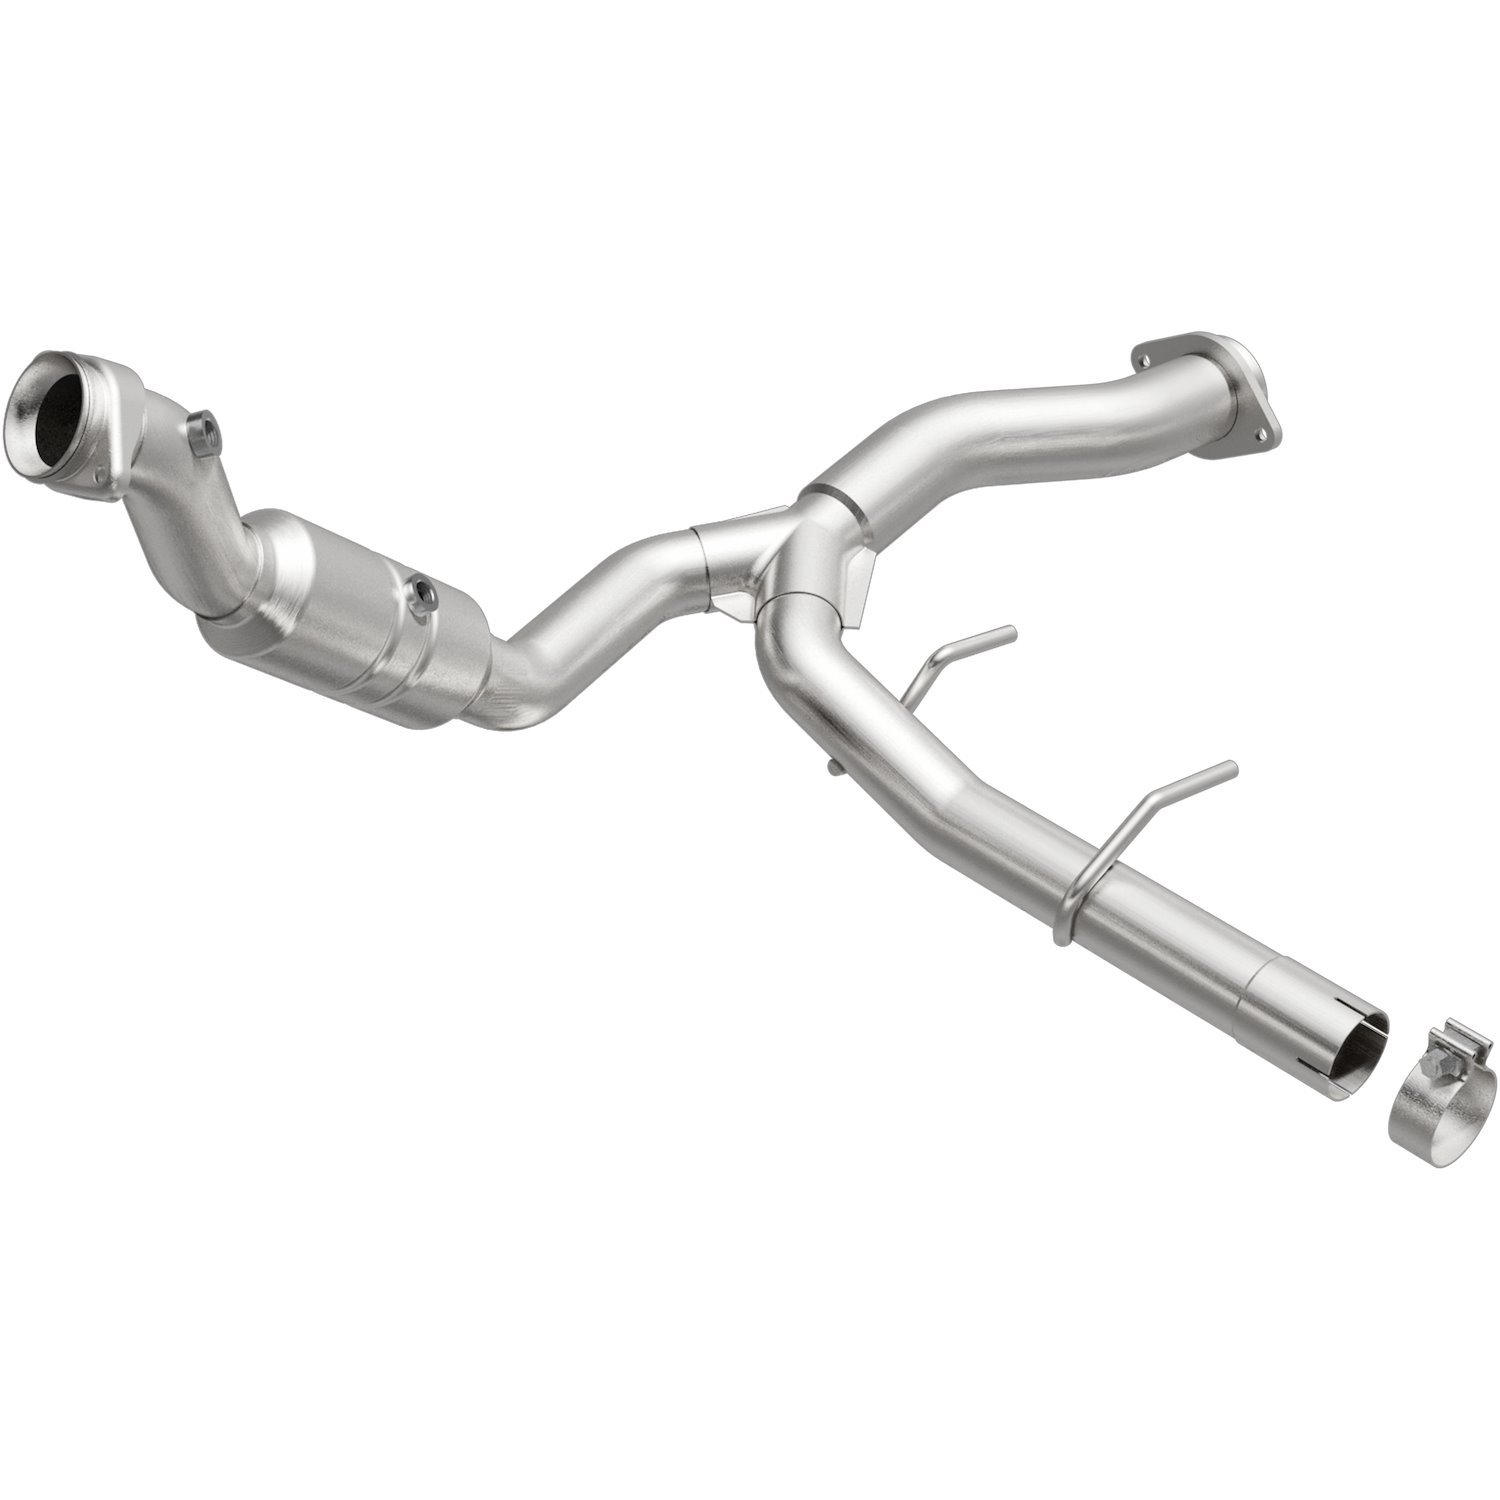 2011-2014 Ford F-150 OEM Grade Federal / EPA Compliant Direct-Fit Catalytic Converter